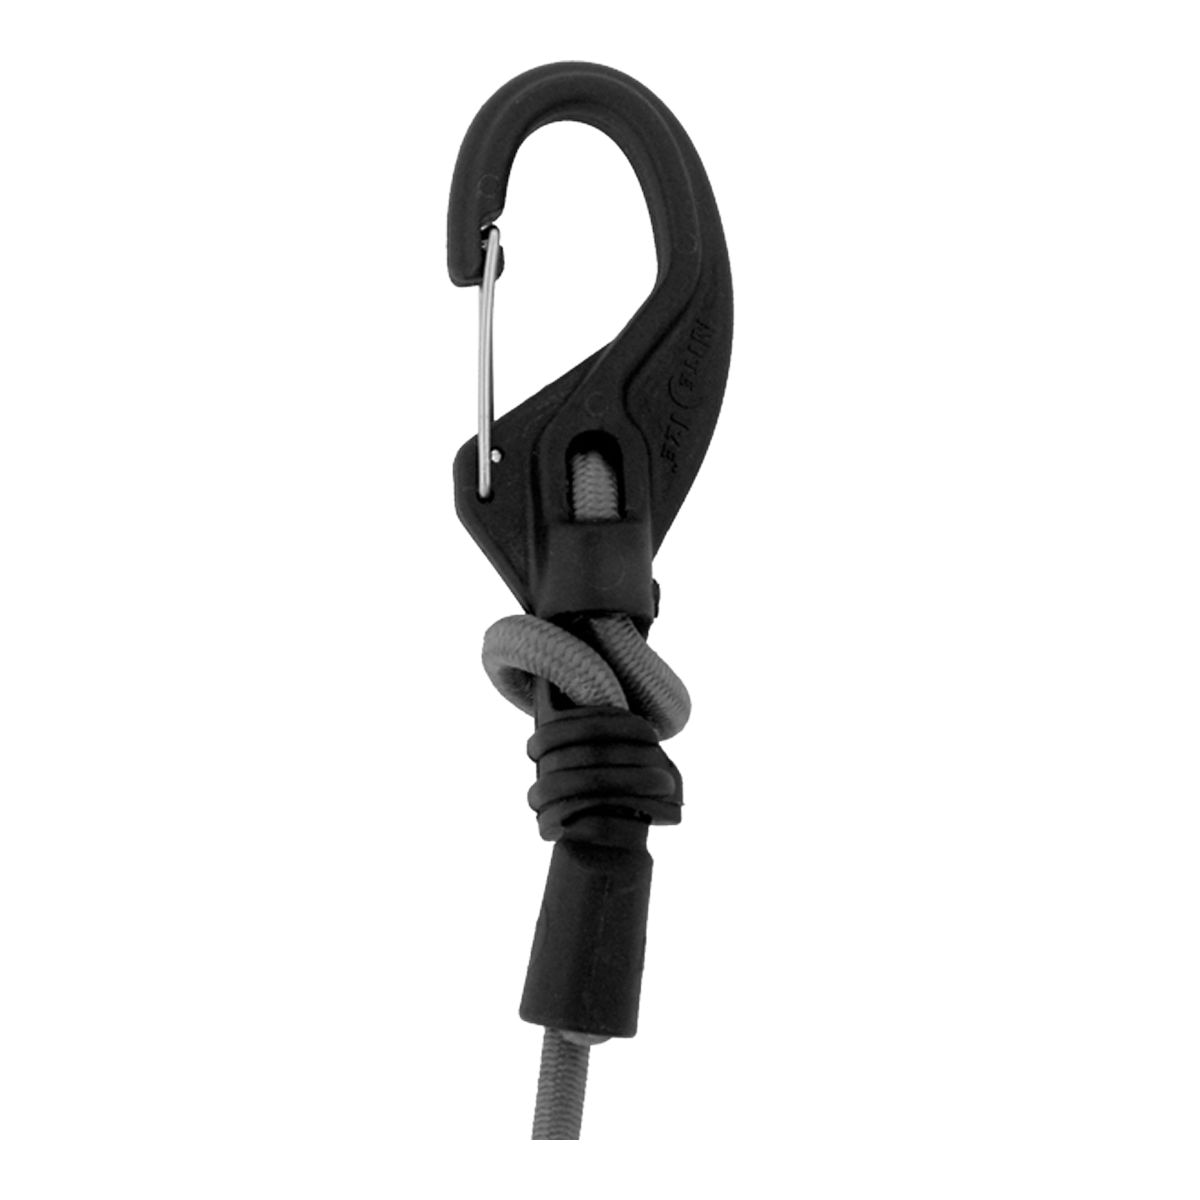 24 Lock-It Adjustable Bungee Cord — Keeper Products